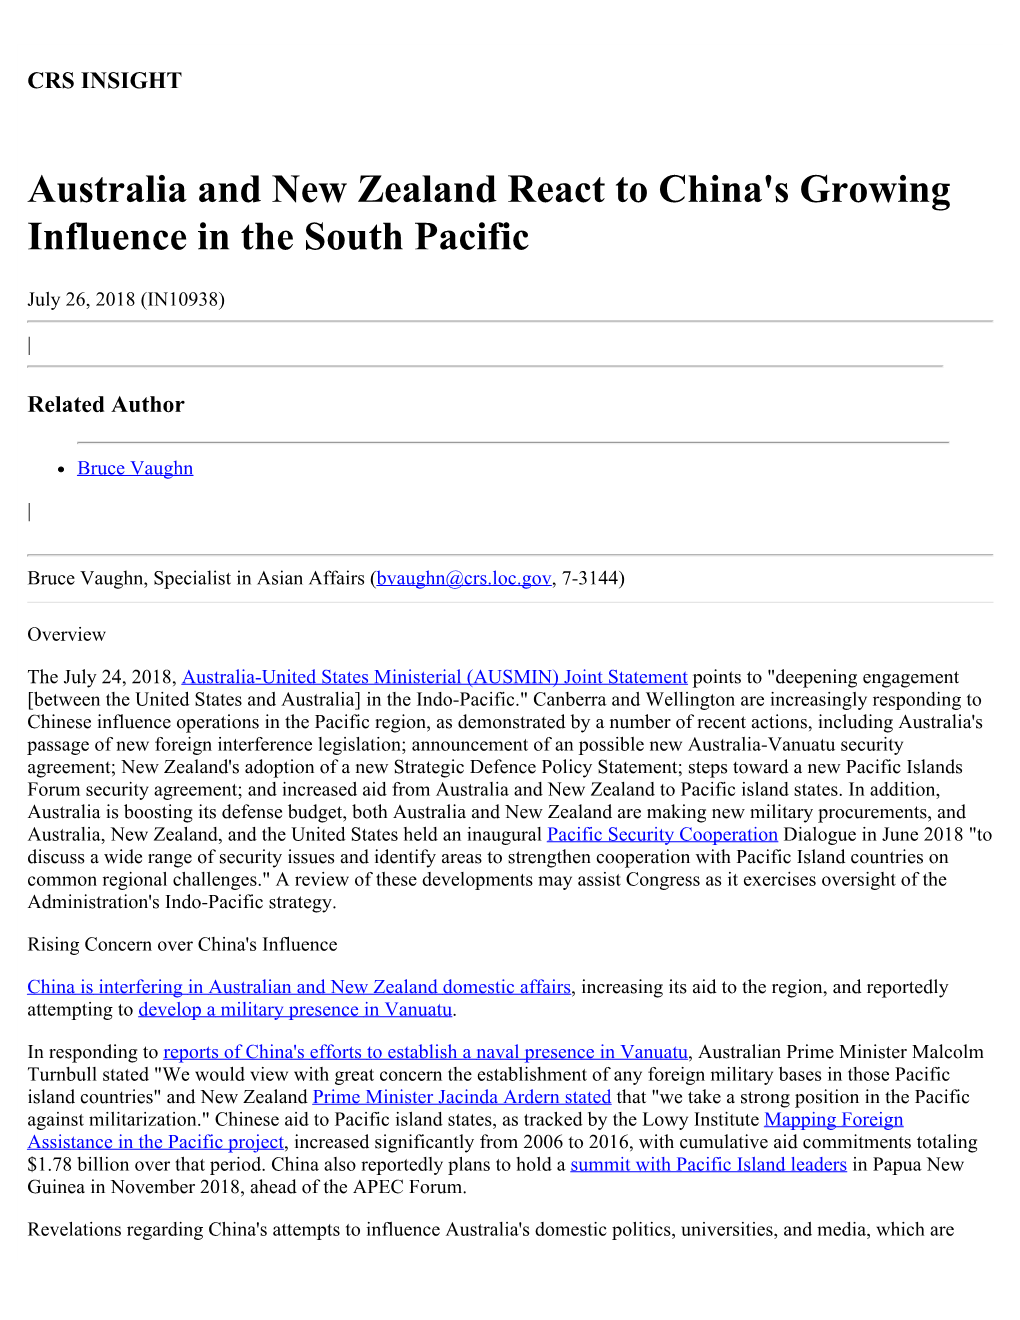 Australia and New Zealand React to China's Growing Influence in the South Pacific